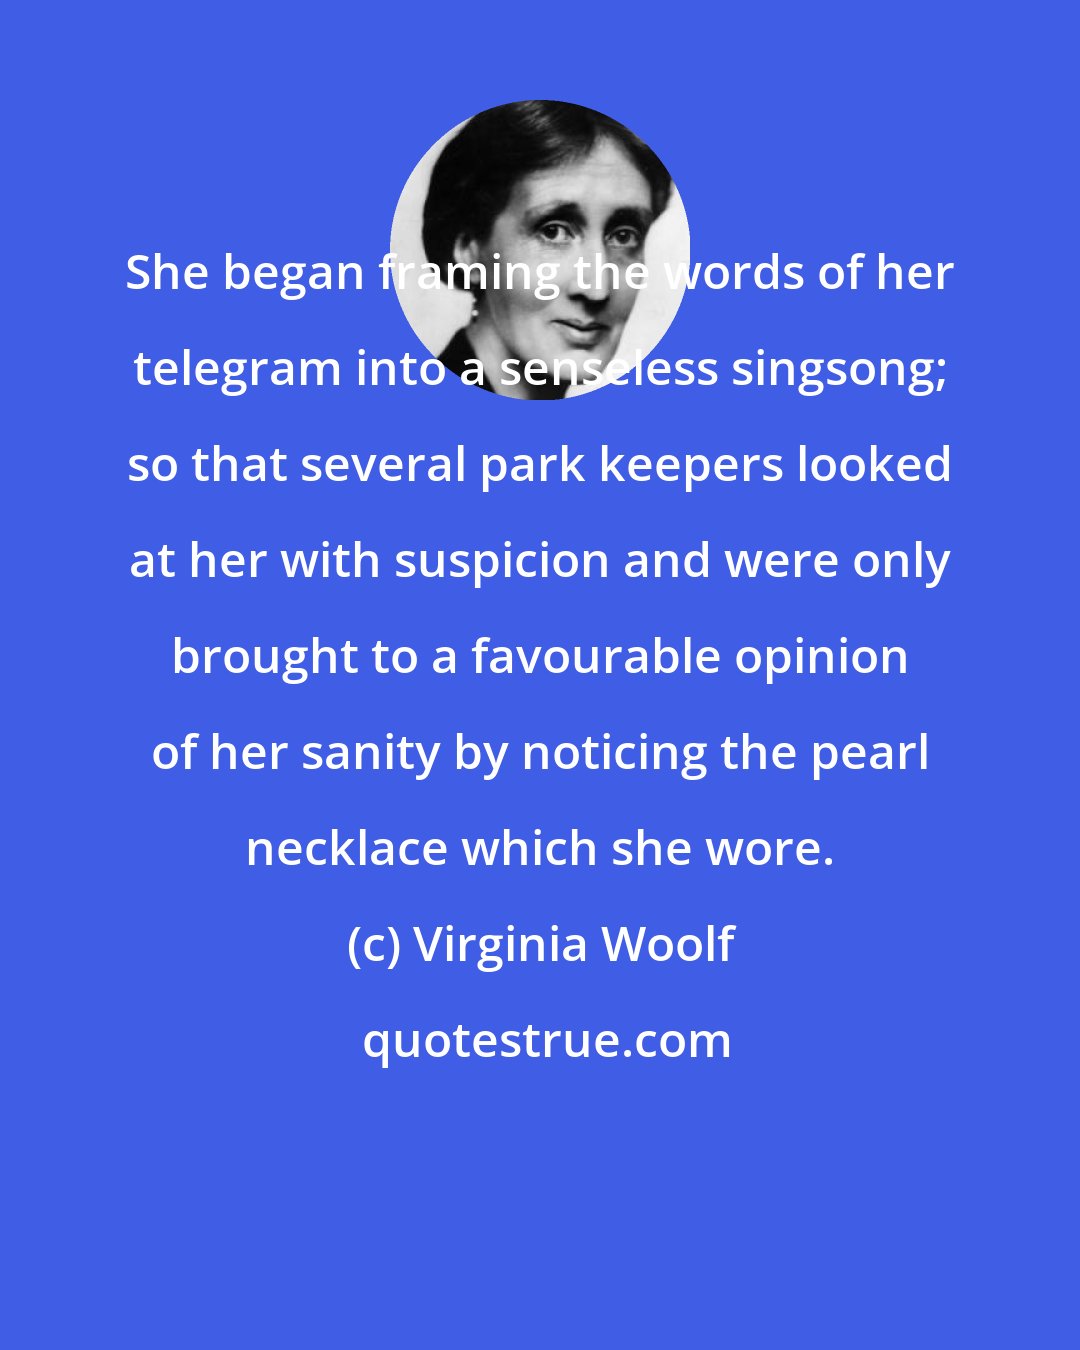 Virginia Woolf: She began framing the words of her telegram into a senseless singsong; so that several park keepers looked at her with suspicion and were only brought to a favourable opinion of her sanity by noticing the pearl necklace which she wore.